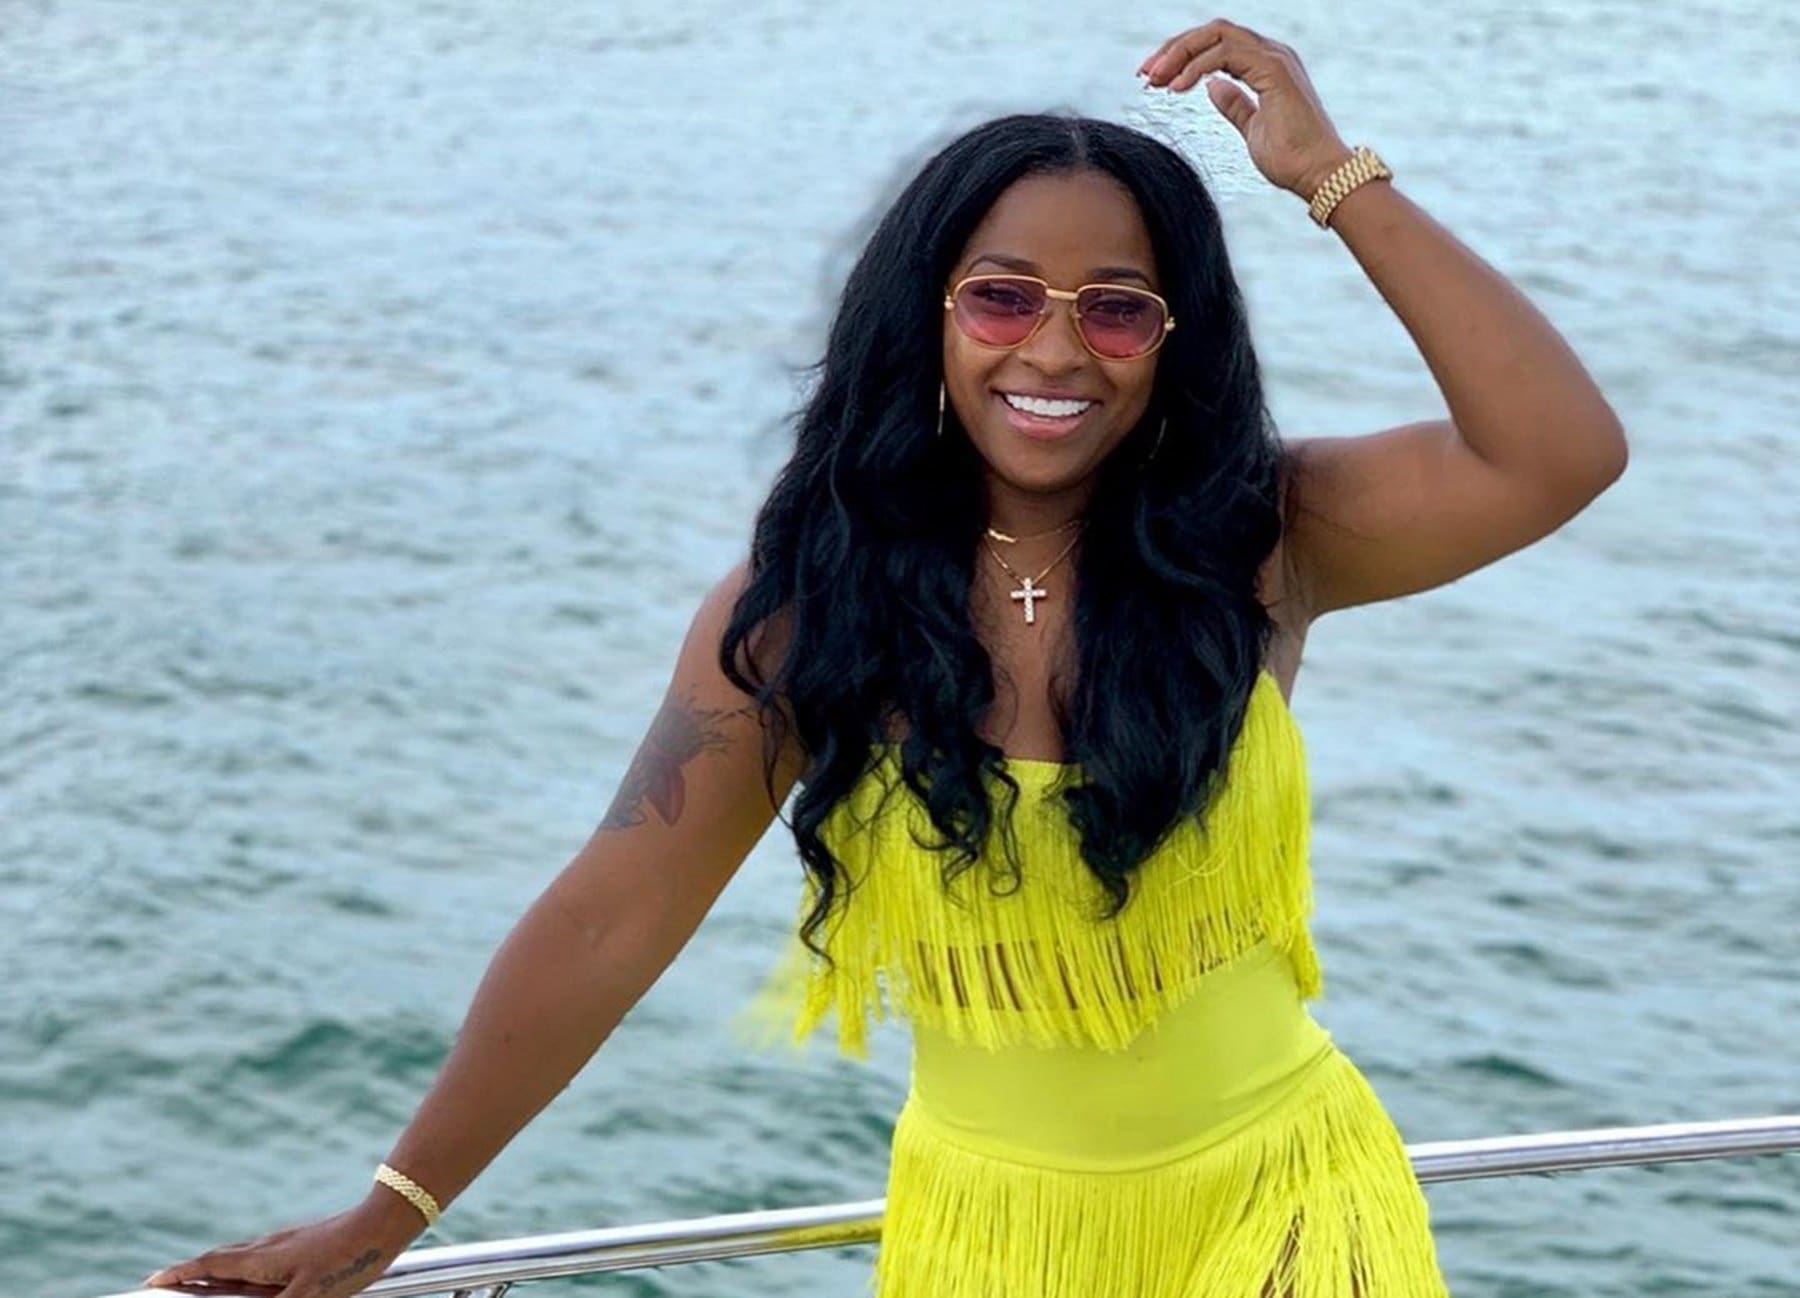 Toya Wright Finishes The 5k Walk/Run Together With Robert Rushing - See The Emotional Video